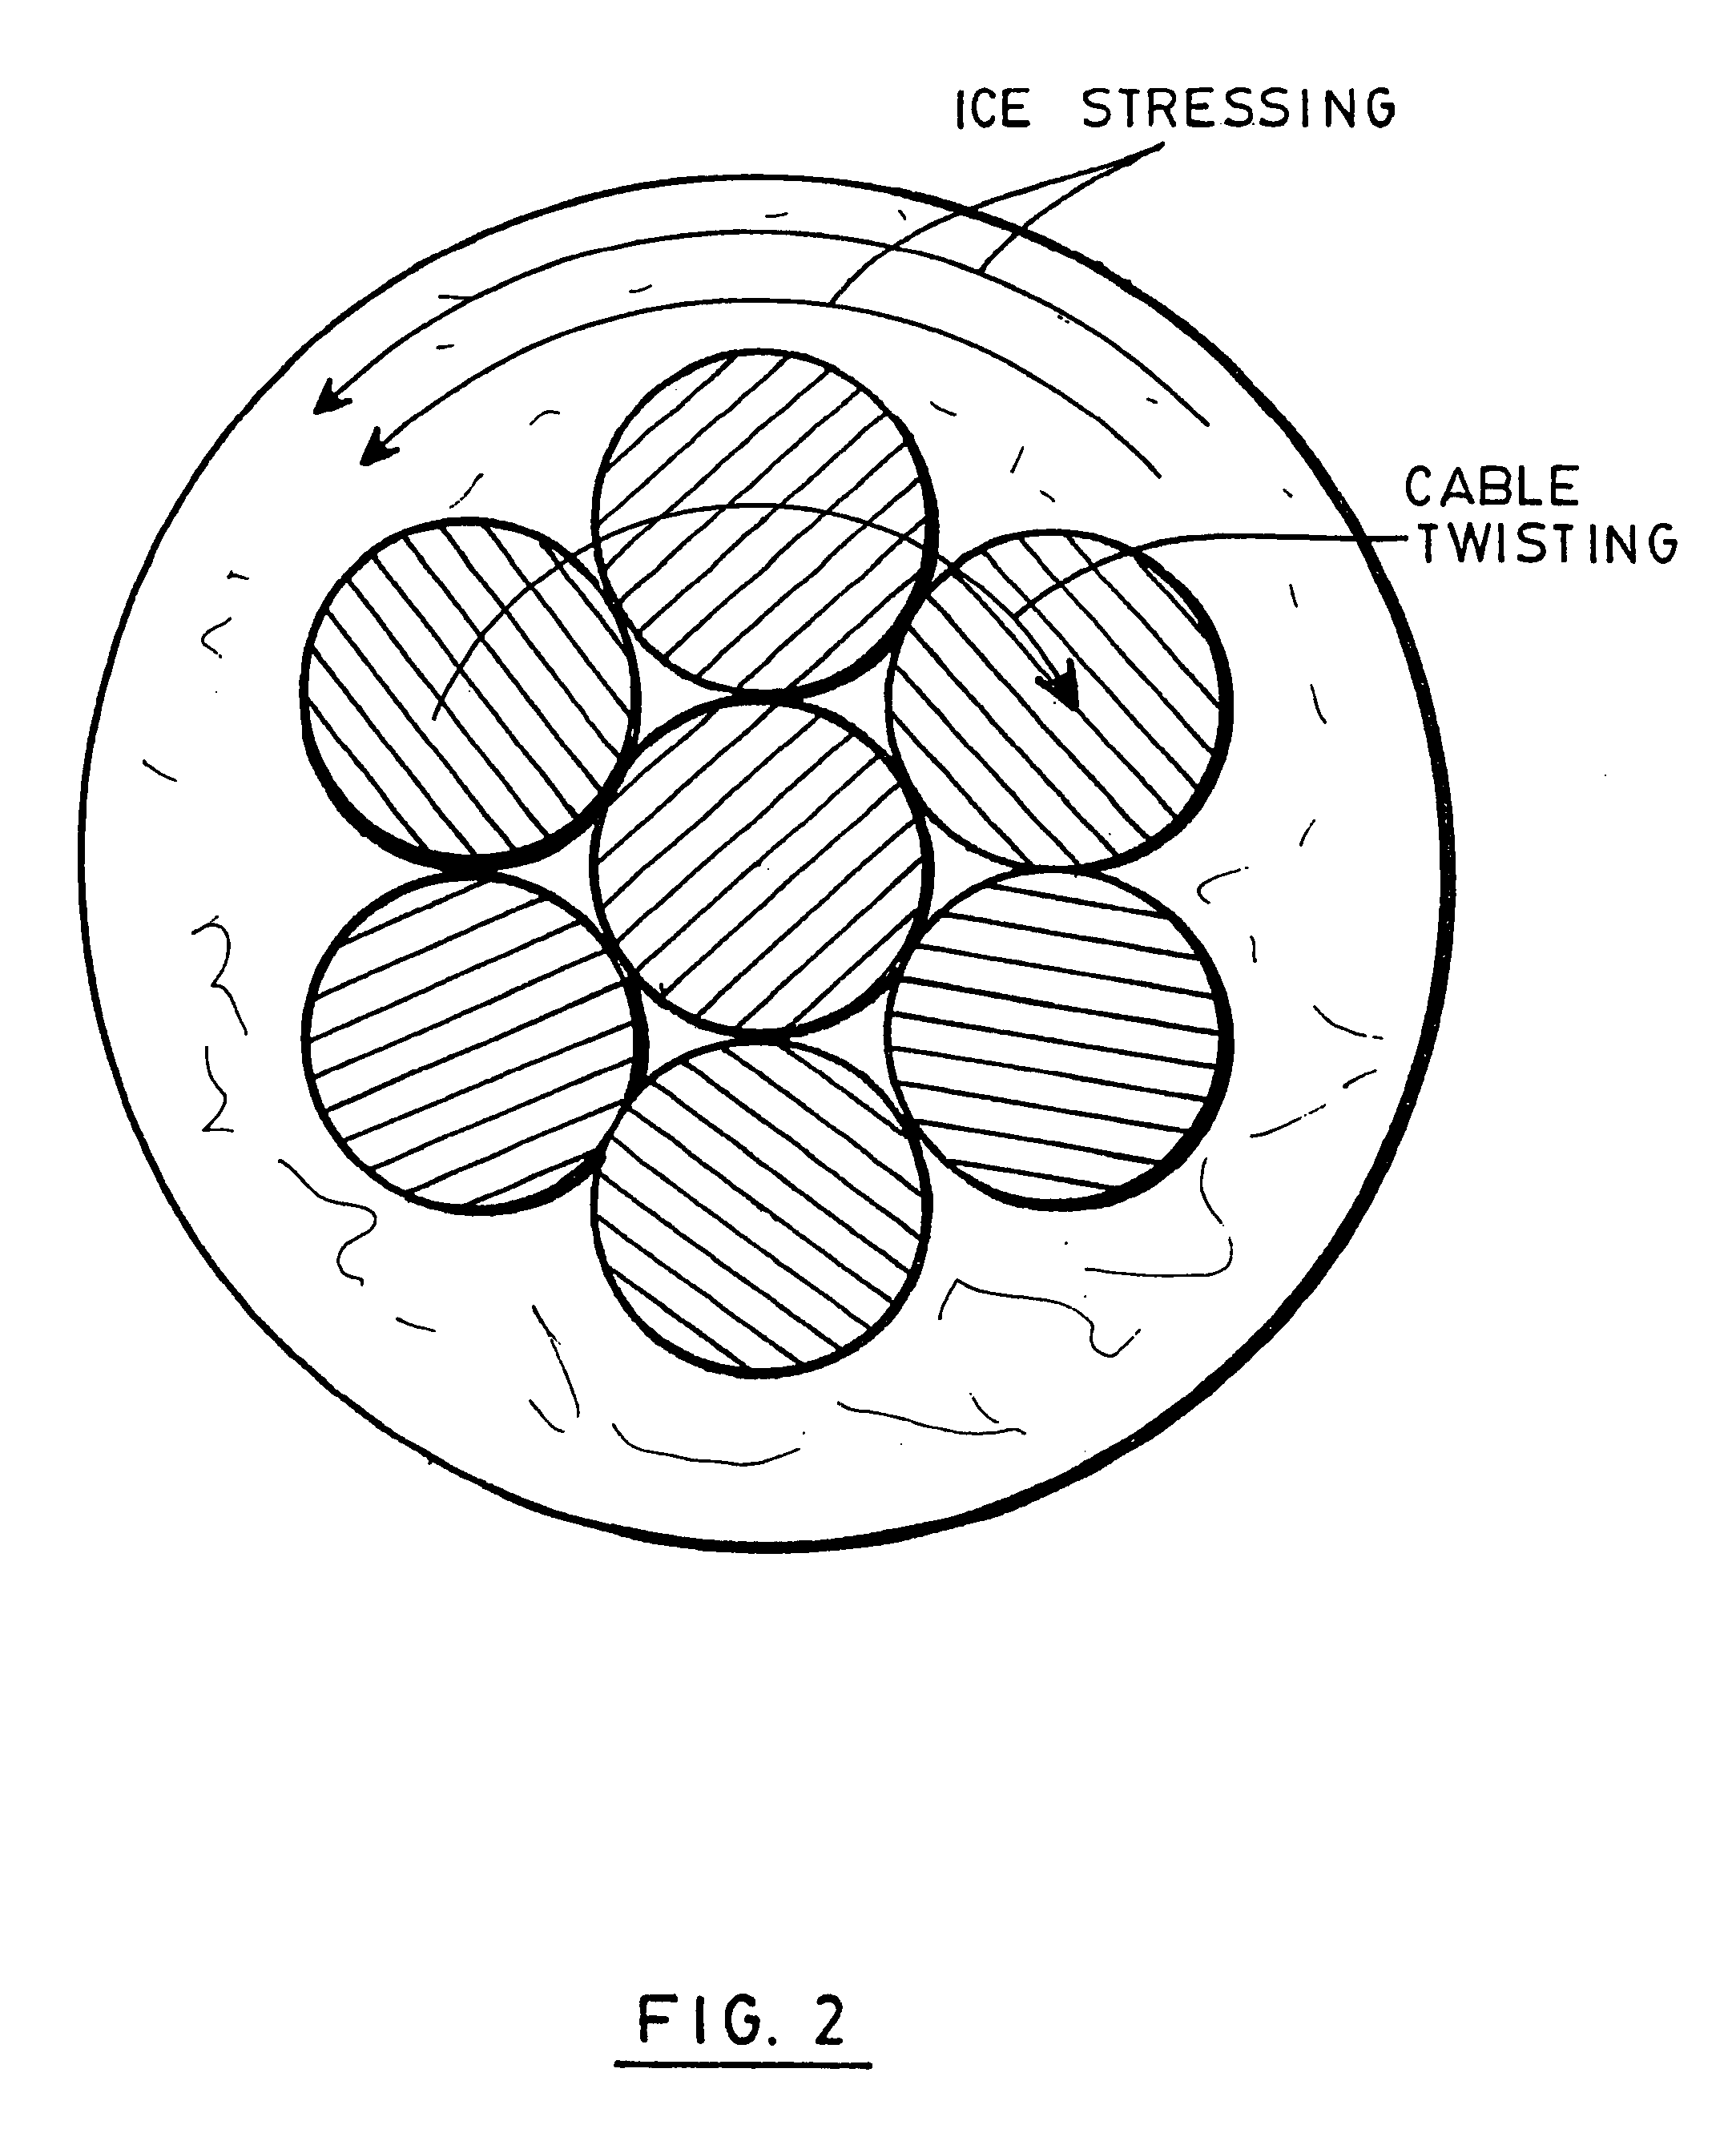 Method and apparatus for breaking ice accretions on an aerial cable